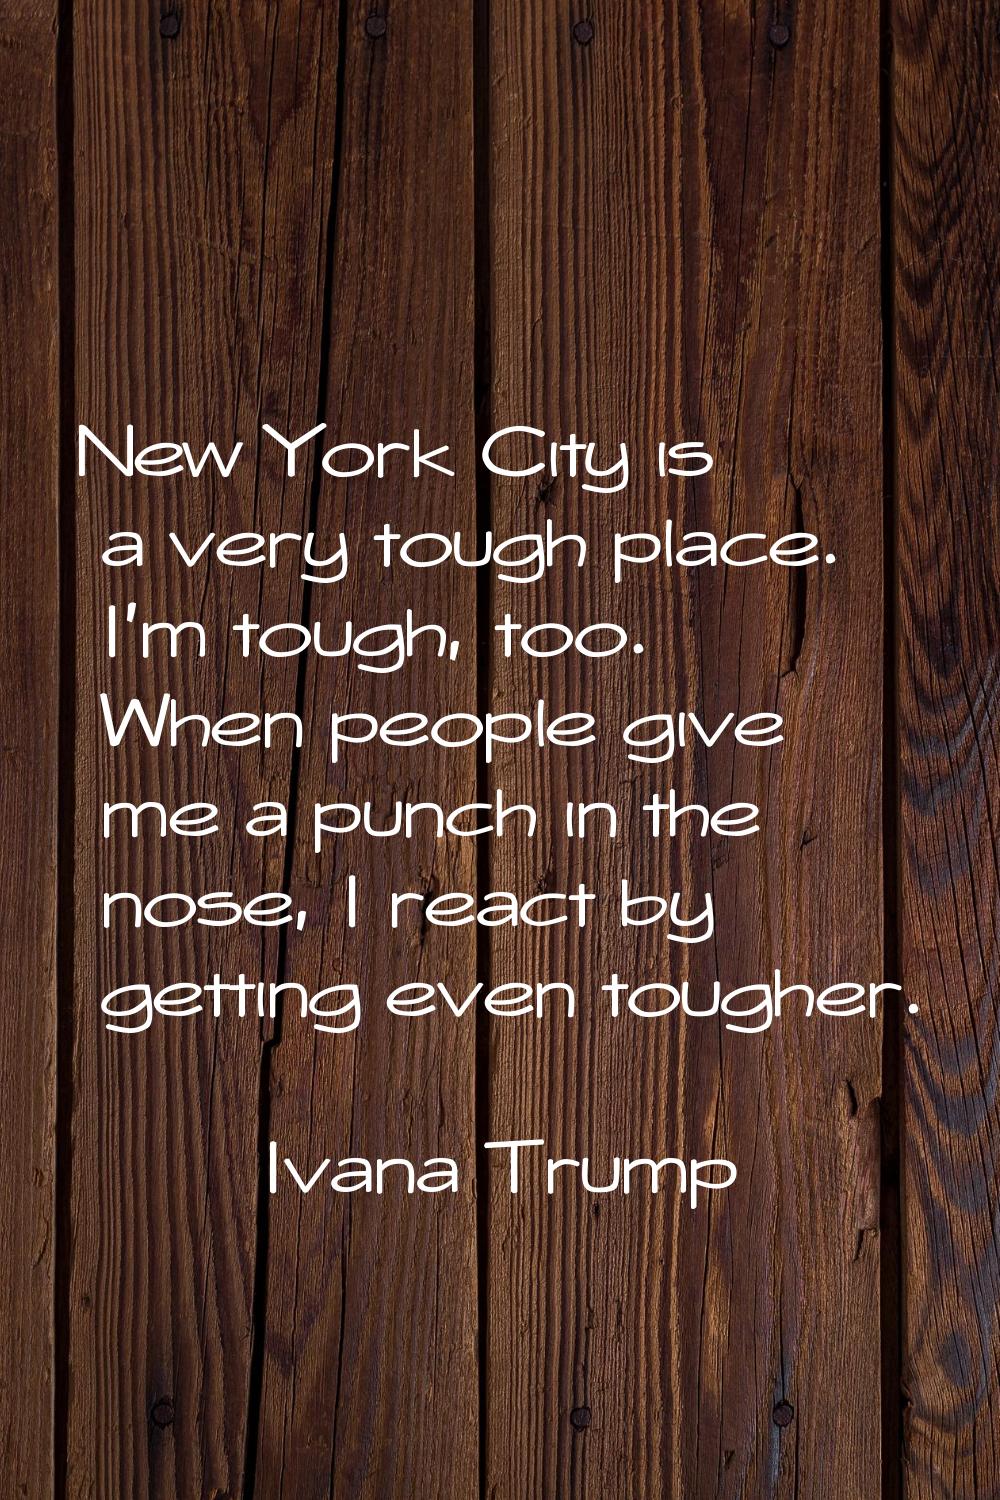 New York City is a very tough place. I'm tough, too. When people give me a punch in the nose, I rea